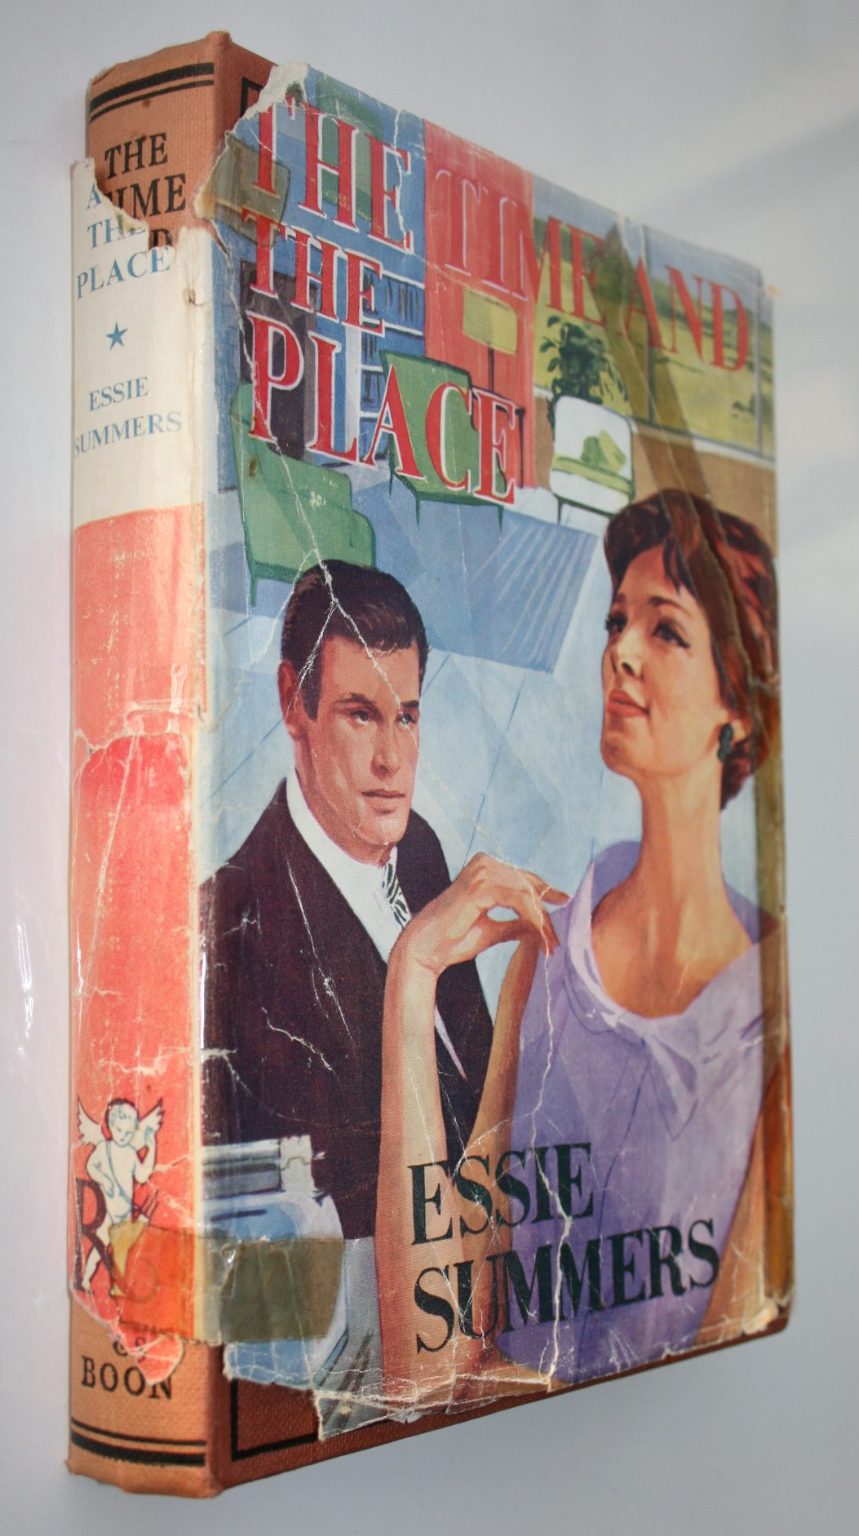 The Time and the Place (First Edition 1958. By Essie Summers